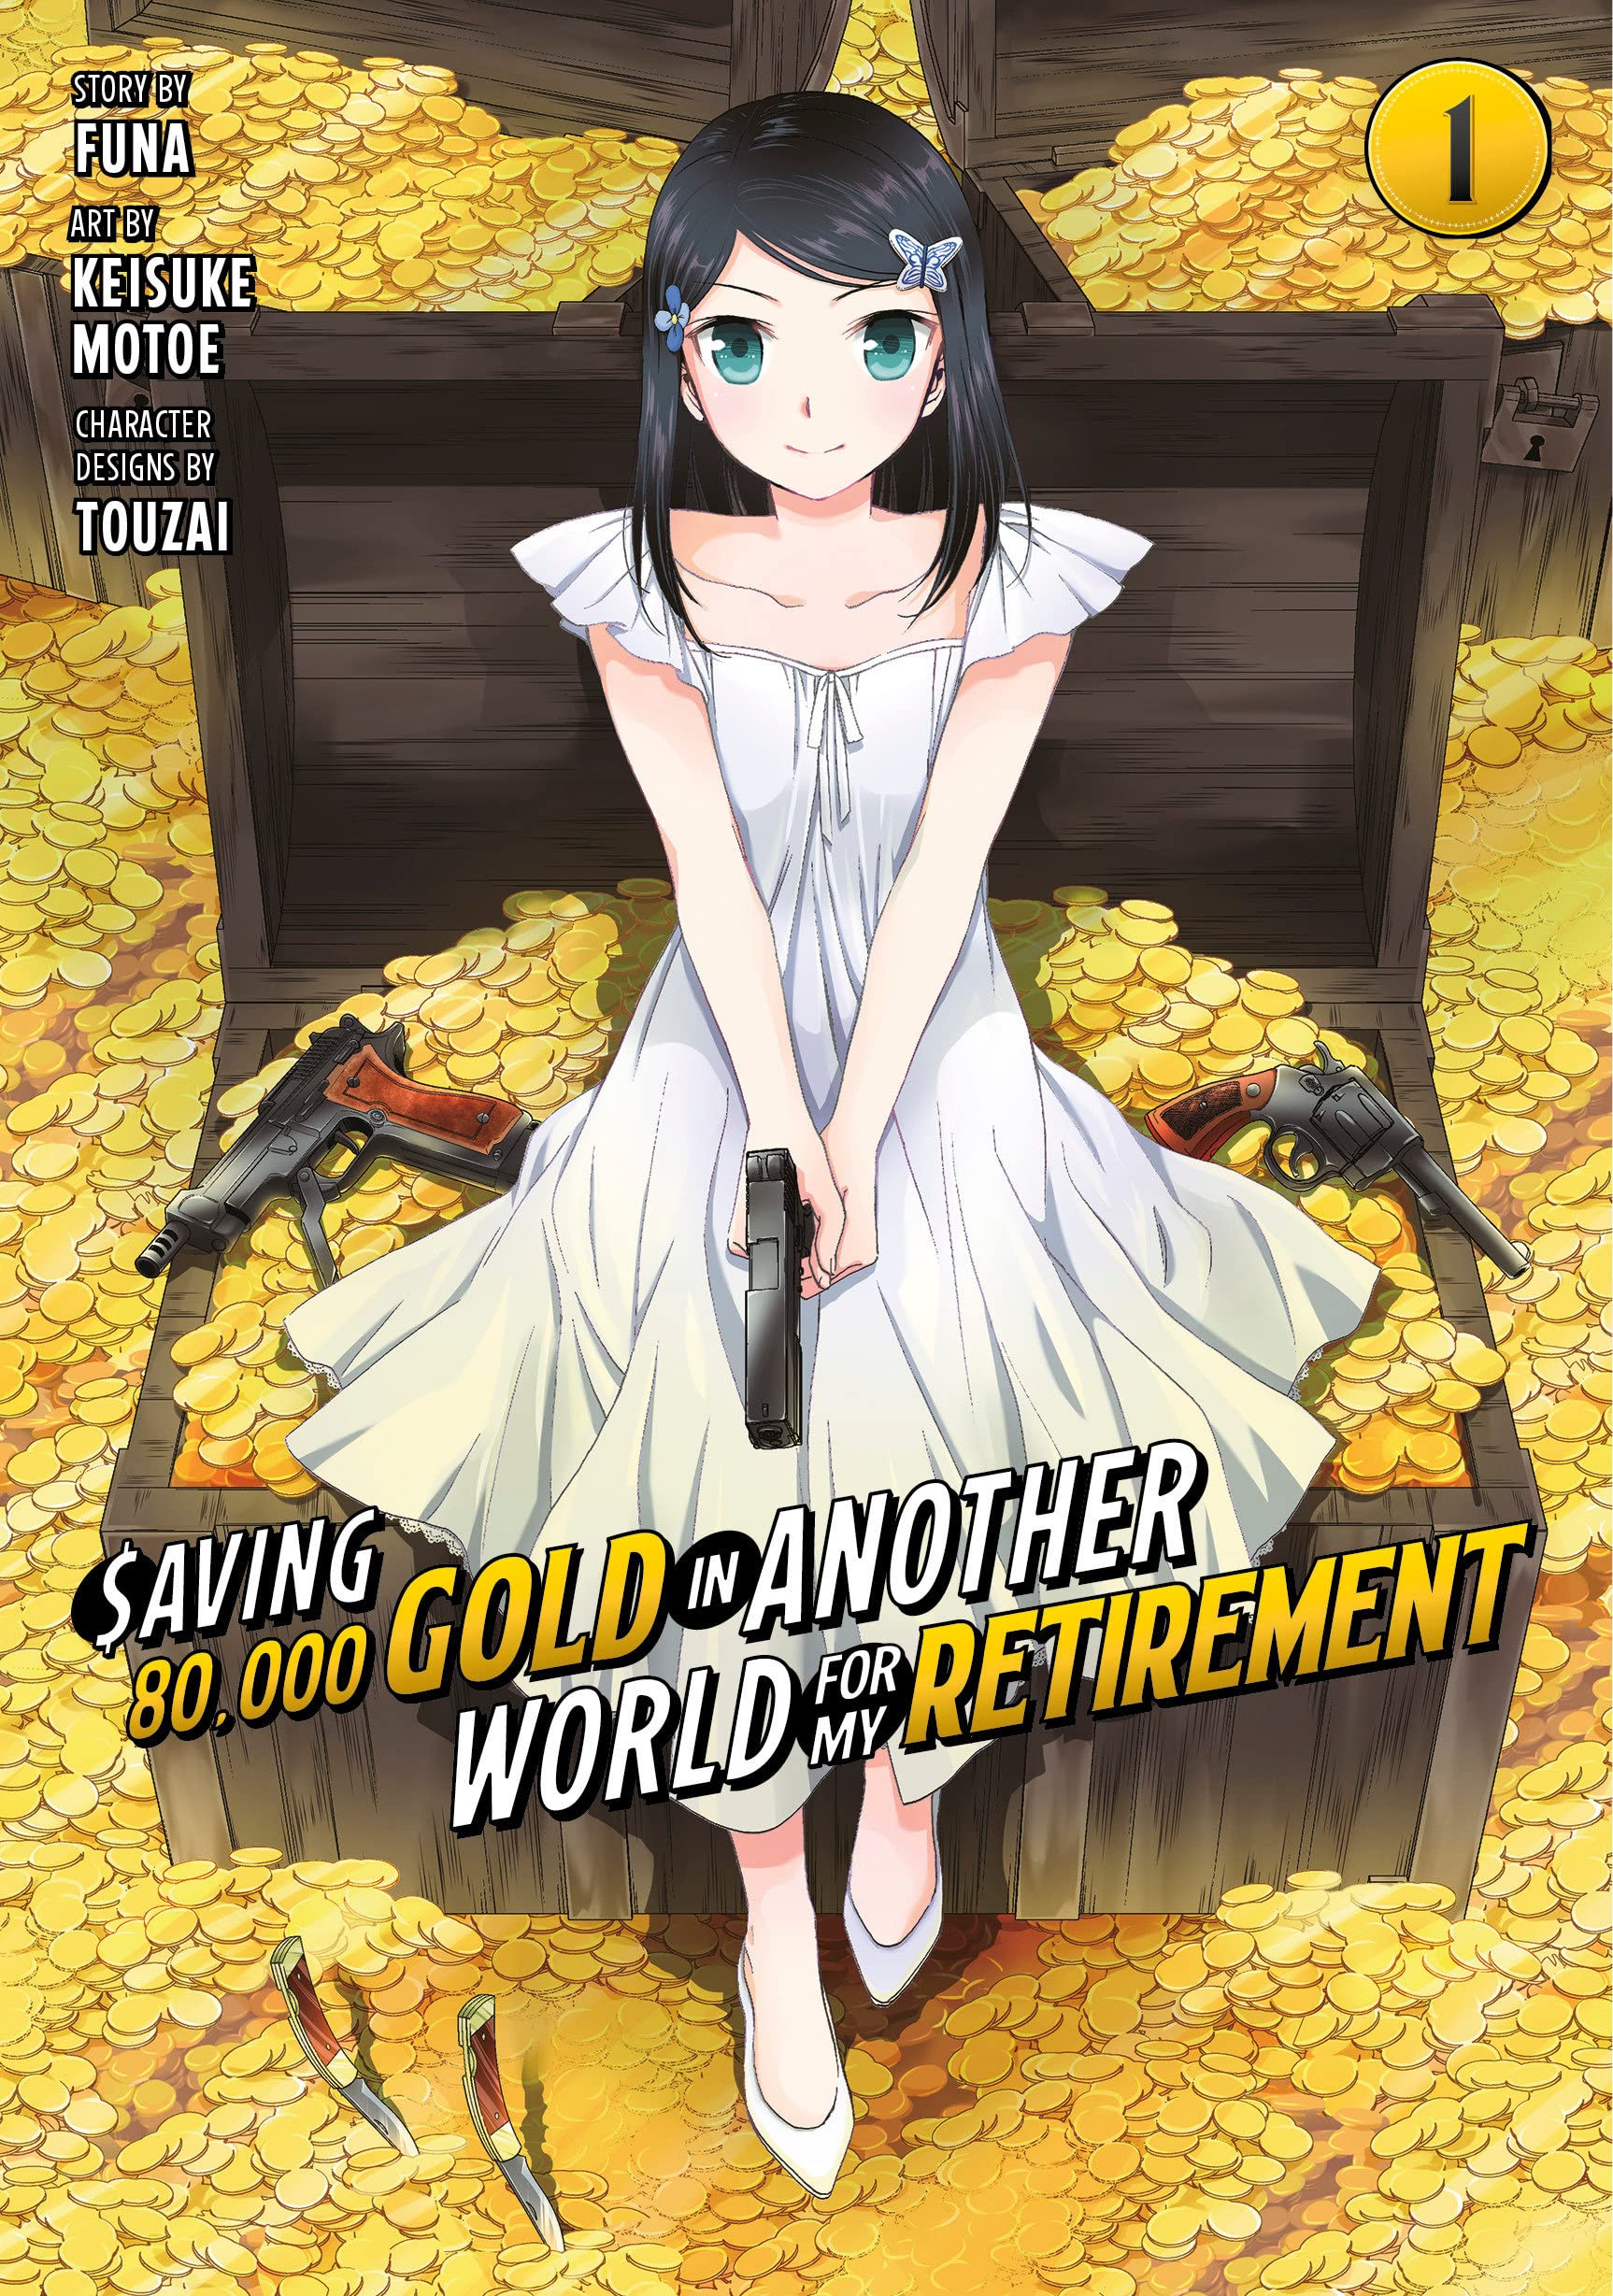 Saving 80,000 Gold in Another World for My Retirement (Manga) Vol. 01